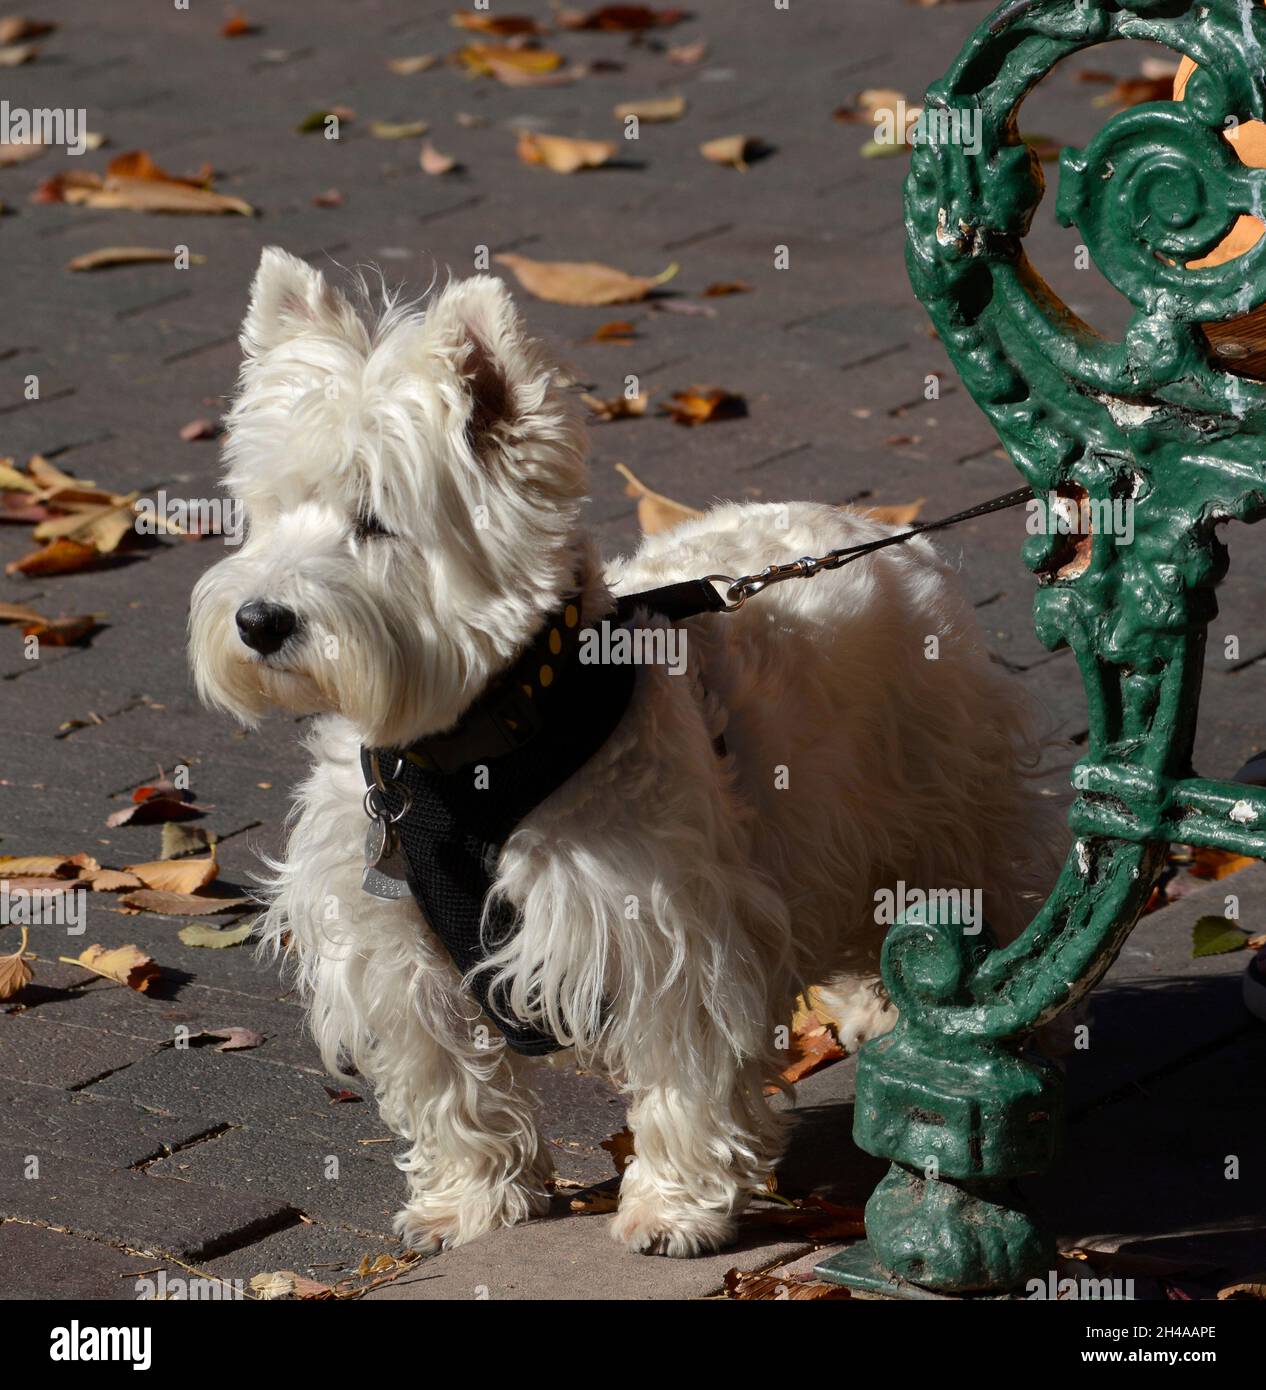 A West Highland White Terrier stands beside its owner sitting an a park bench in Santa Fe, New Mexico. Stock Photo